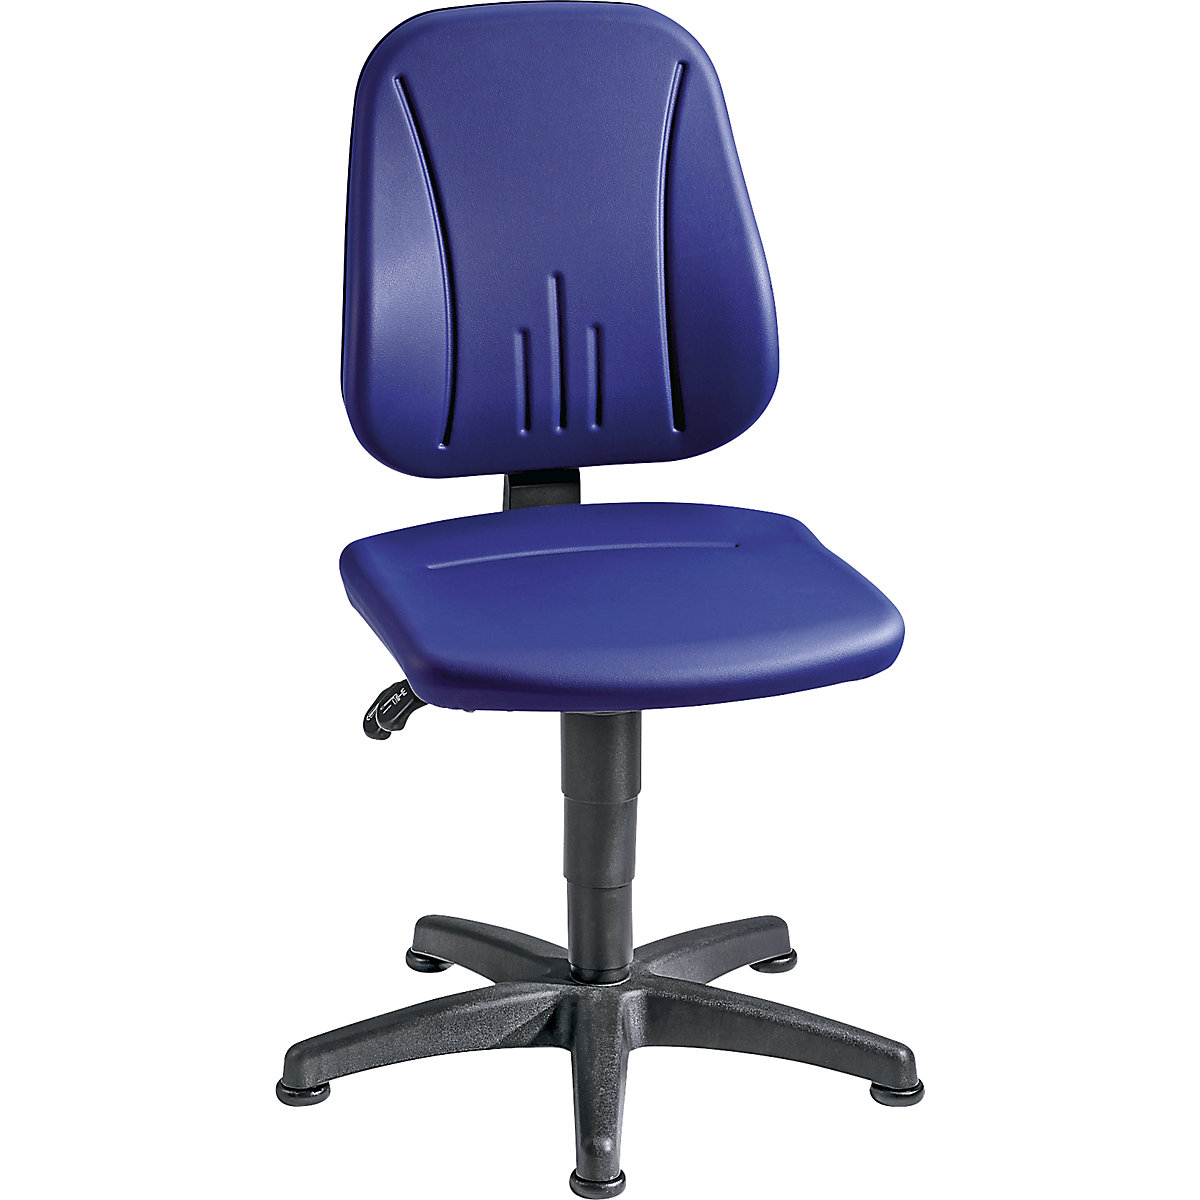 Industrial swivel chair – bimos, with gas lift height adjustment, vinyl cover, blue, with floor glides-18